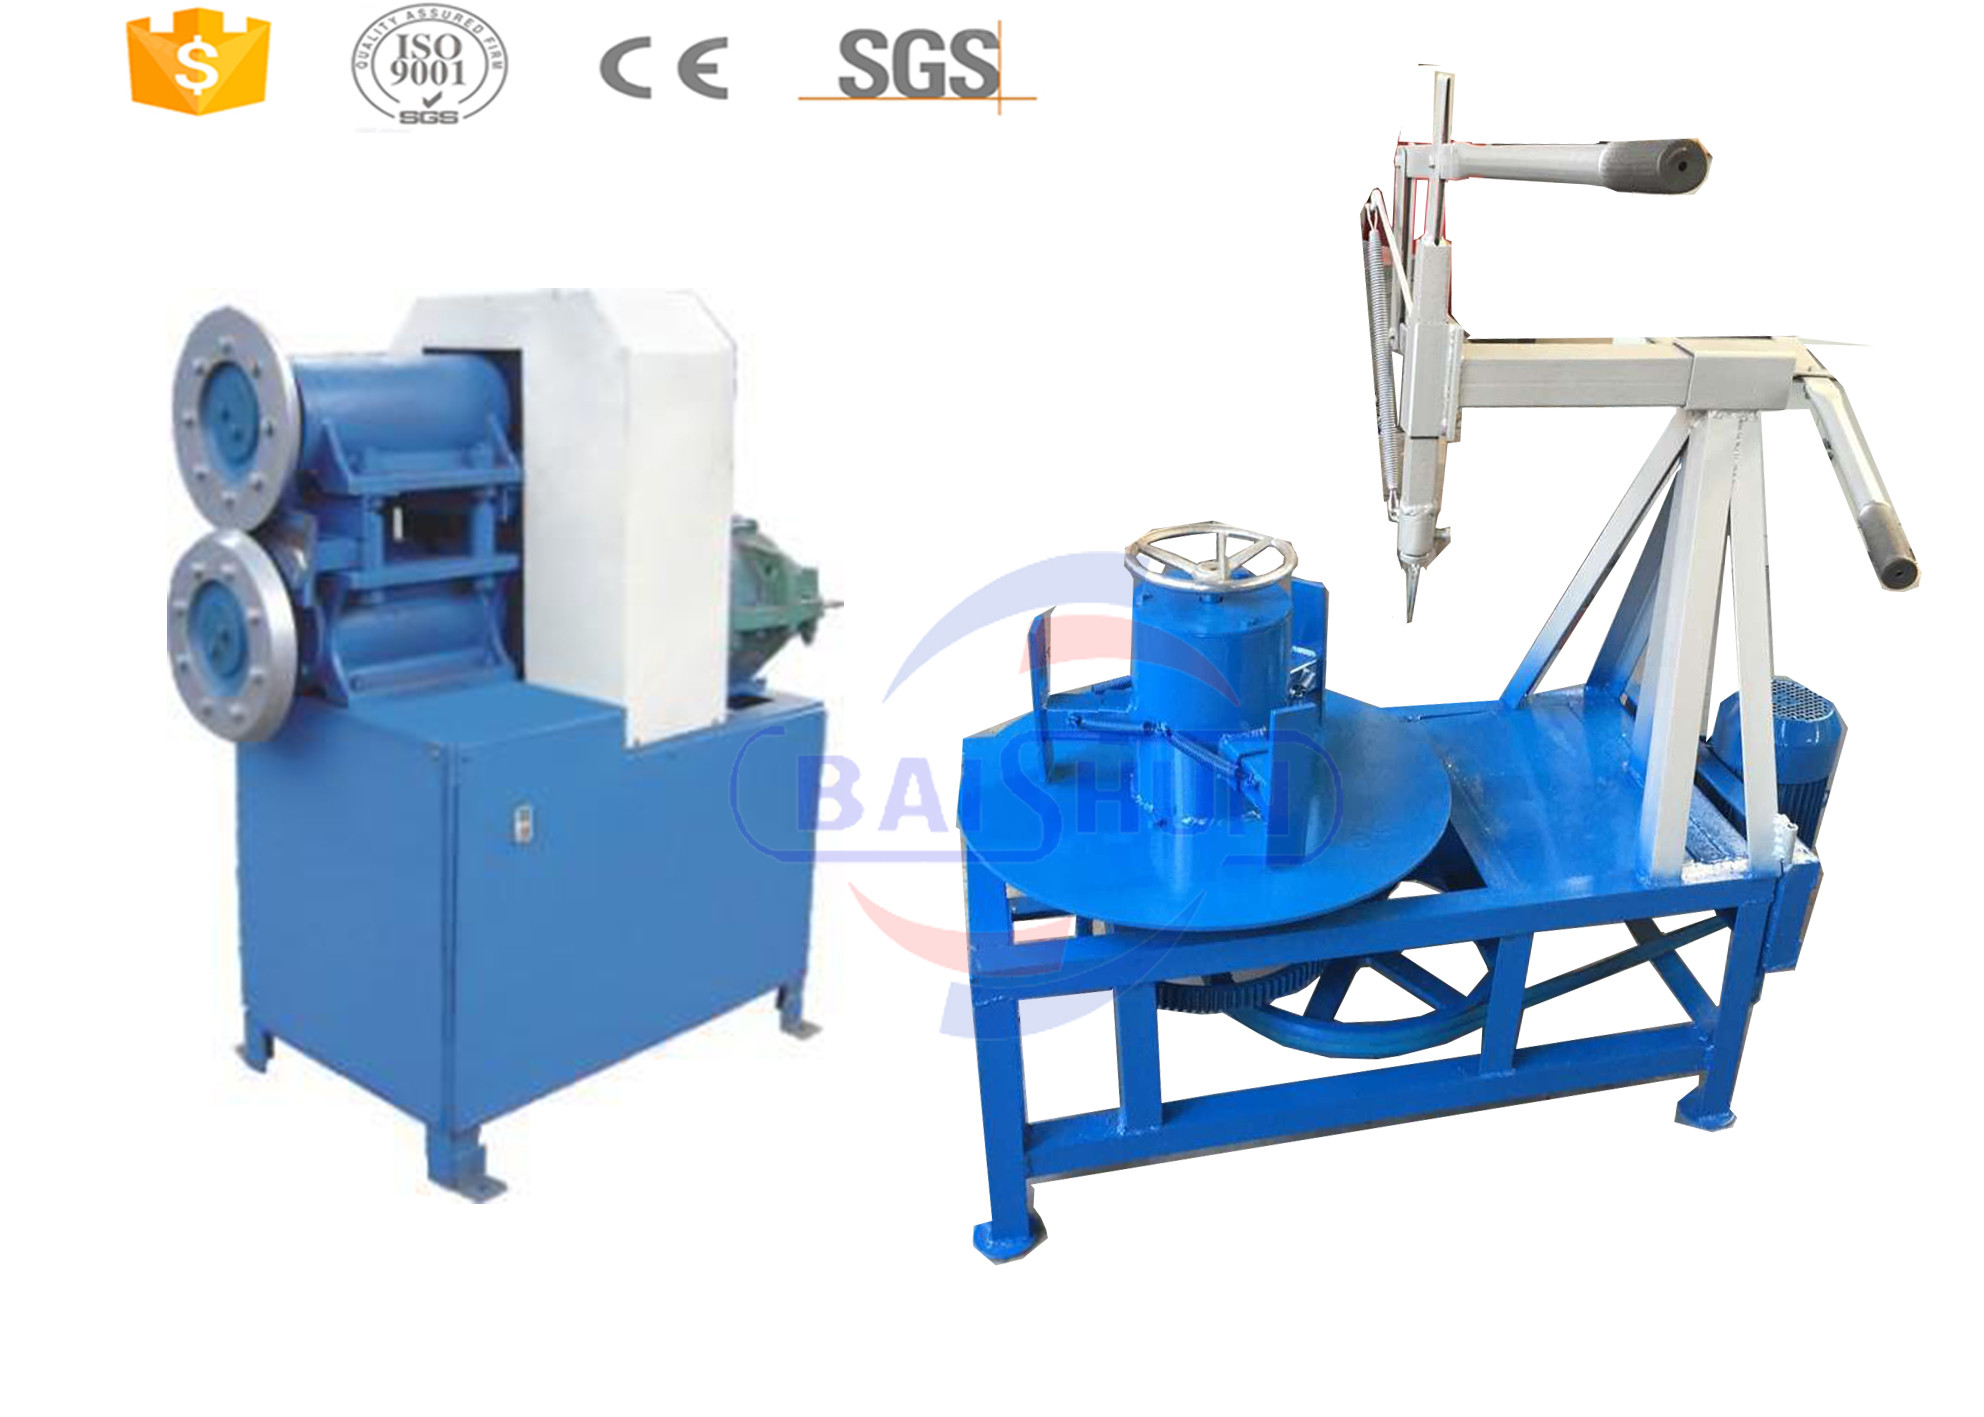  Plastic Scrap Rubber Tires Recycling Machine With Powerful Engine CE Certificate Manufactures